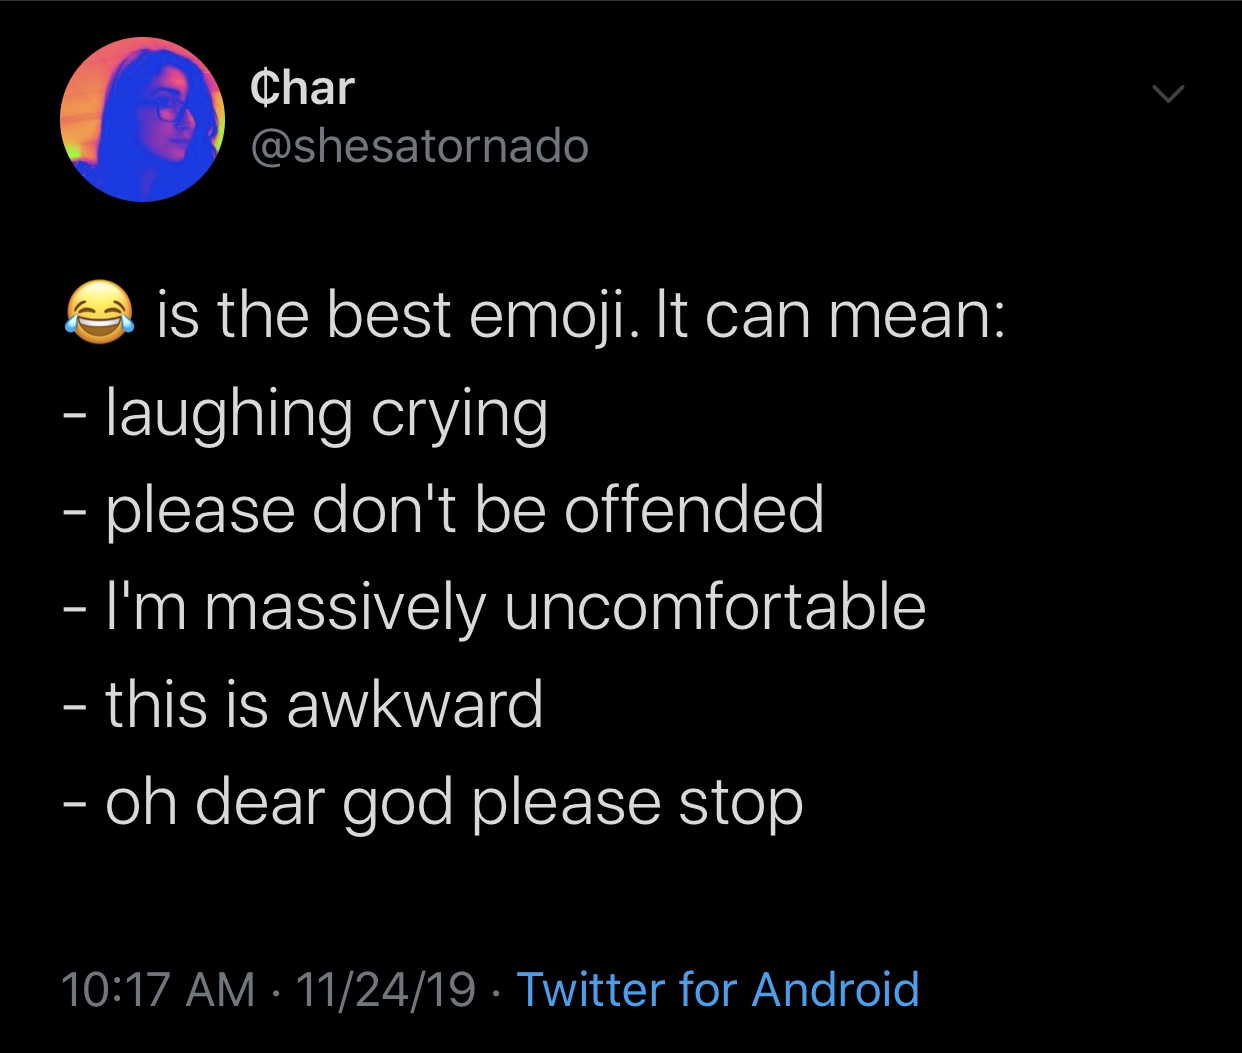 meme - movie disclaimer examples - Char a is the best emoji. It can mean laughing crying please don't be offended I'm massively uncomfortable this is awkward oh dear god please stop 112419 . Twitter for Android